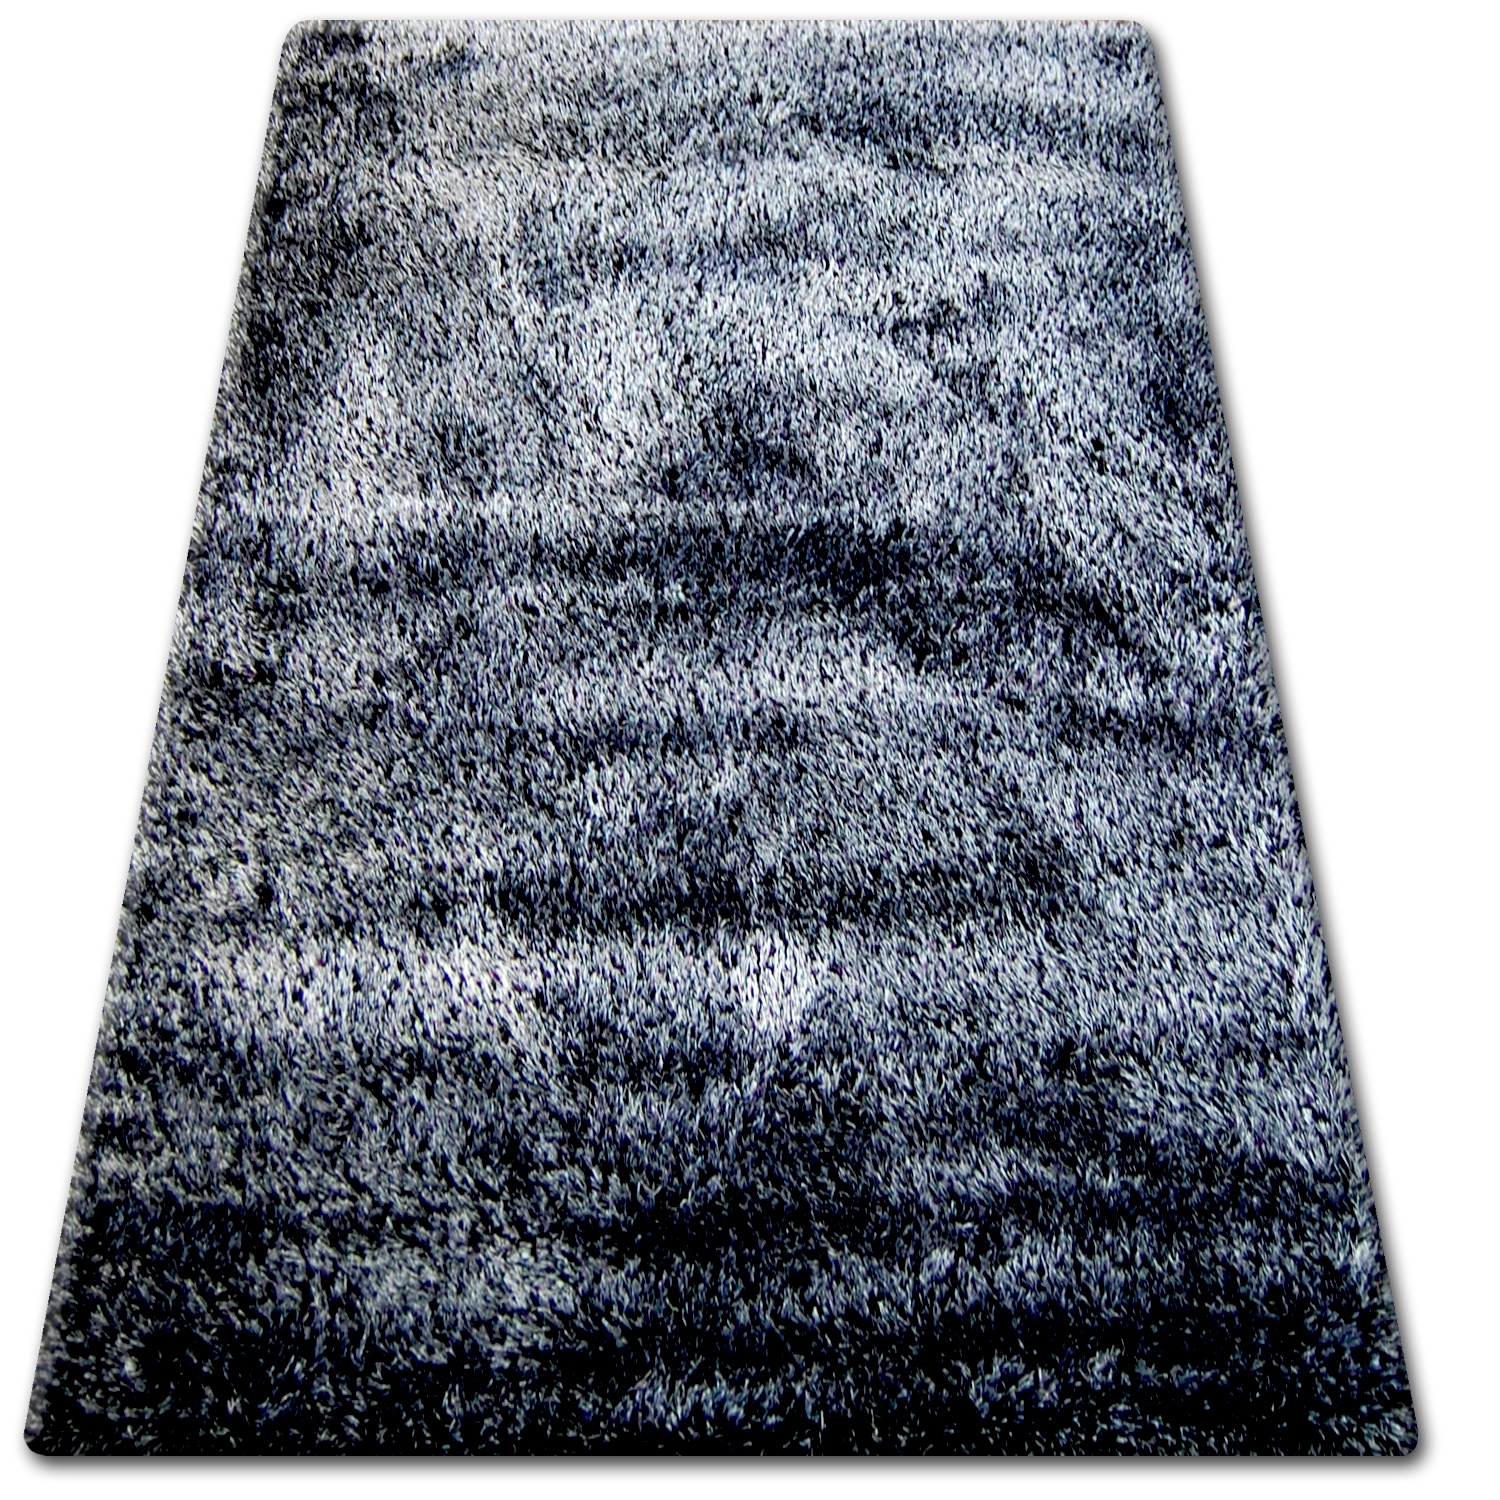 CHEAP RUGS ROUND SHAGGY 5cm BLUE HIGH QUALITY nice in touch CARPETS MANY SIZE 